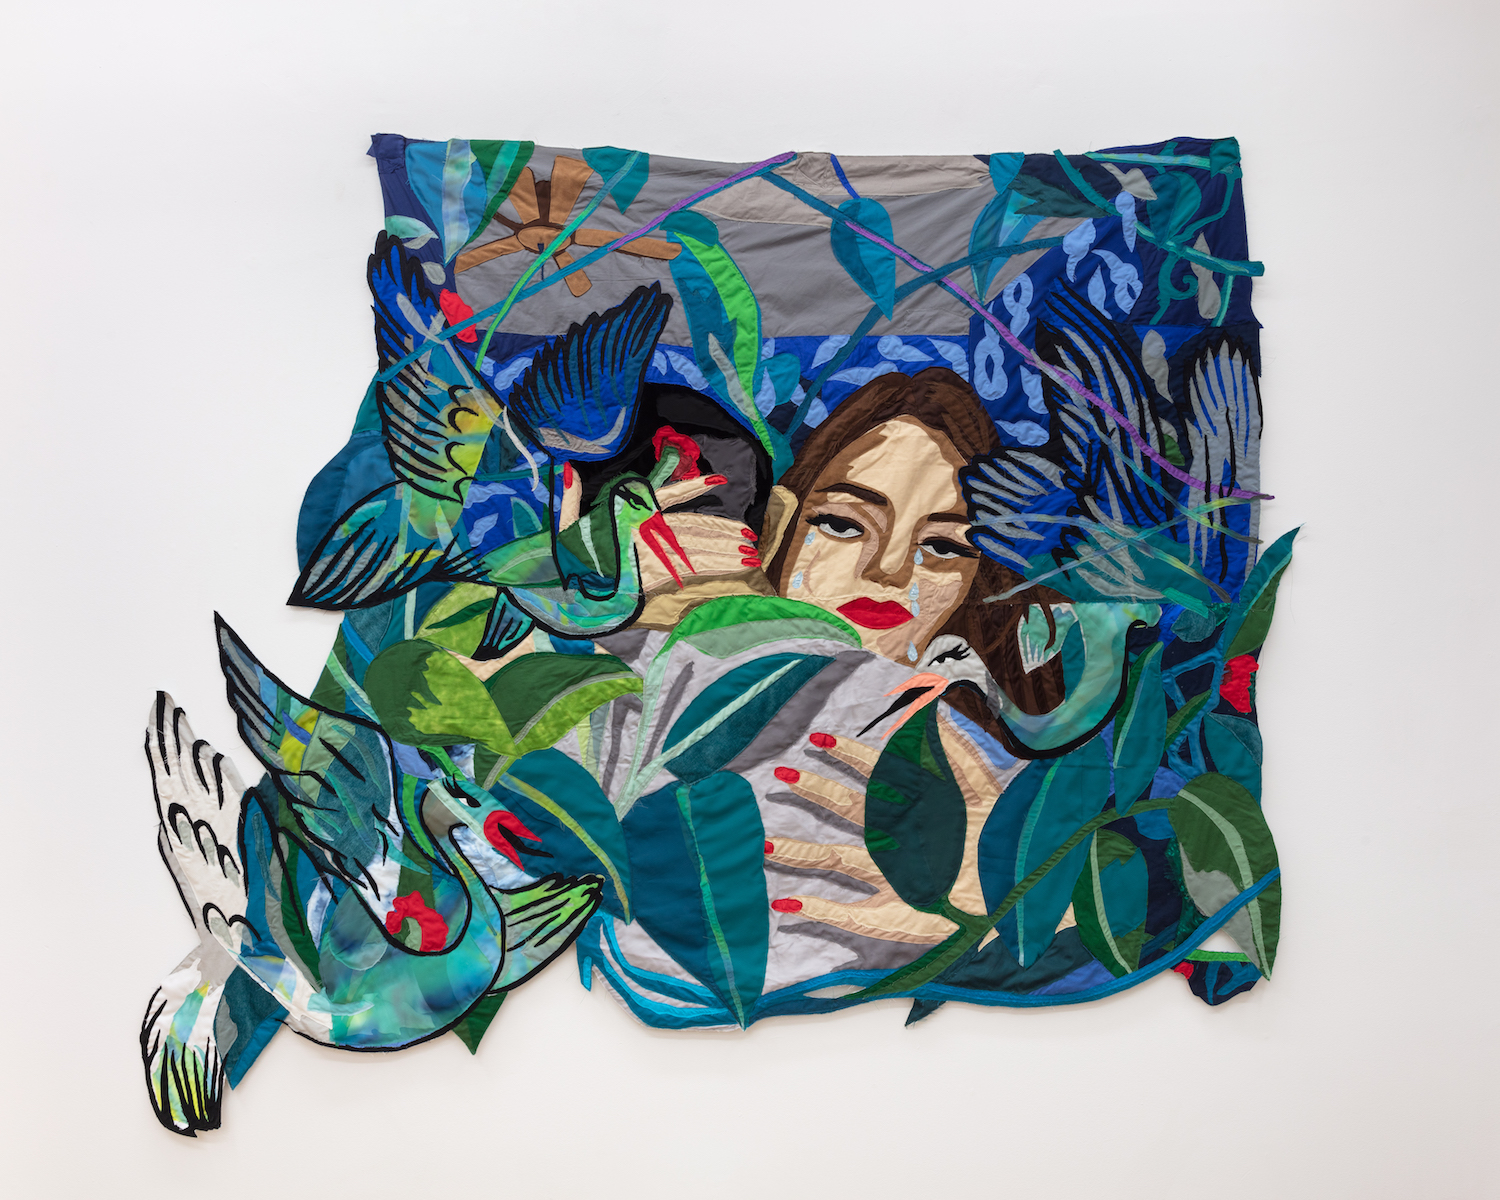 The Lovers I / The Chanting Storks, 2021, Chiffon muslin, cotton, polyester, silk, acrylic paint, suede, and found fabric, 69 x 78 in
Courtesy of Cooper Cole, Toronto